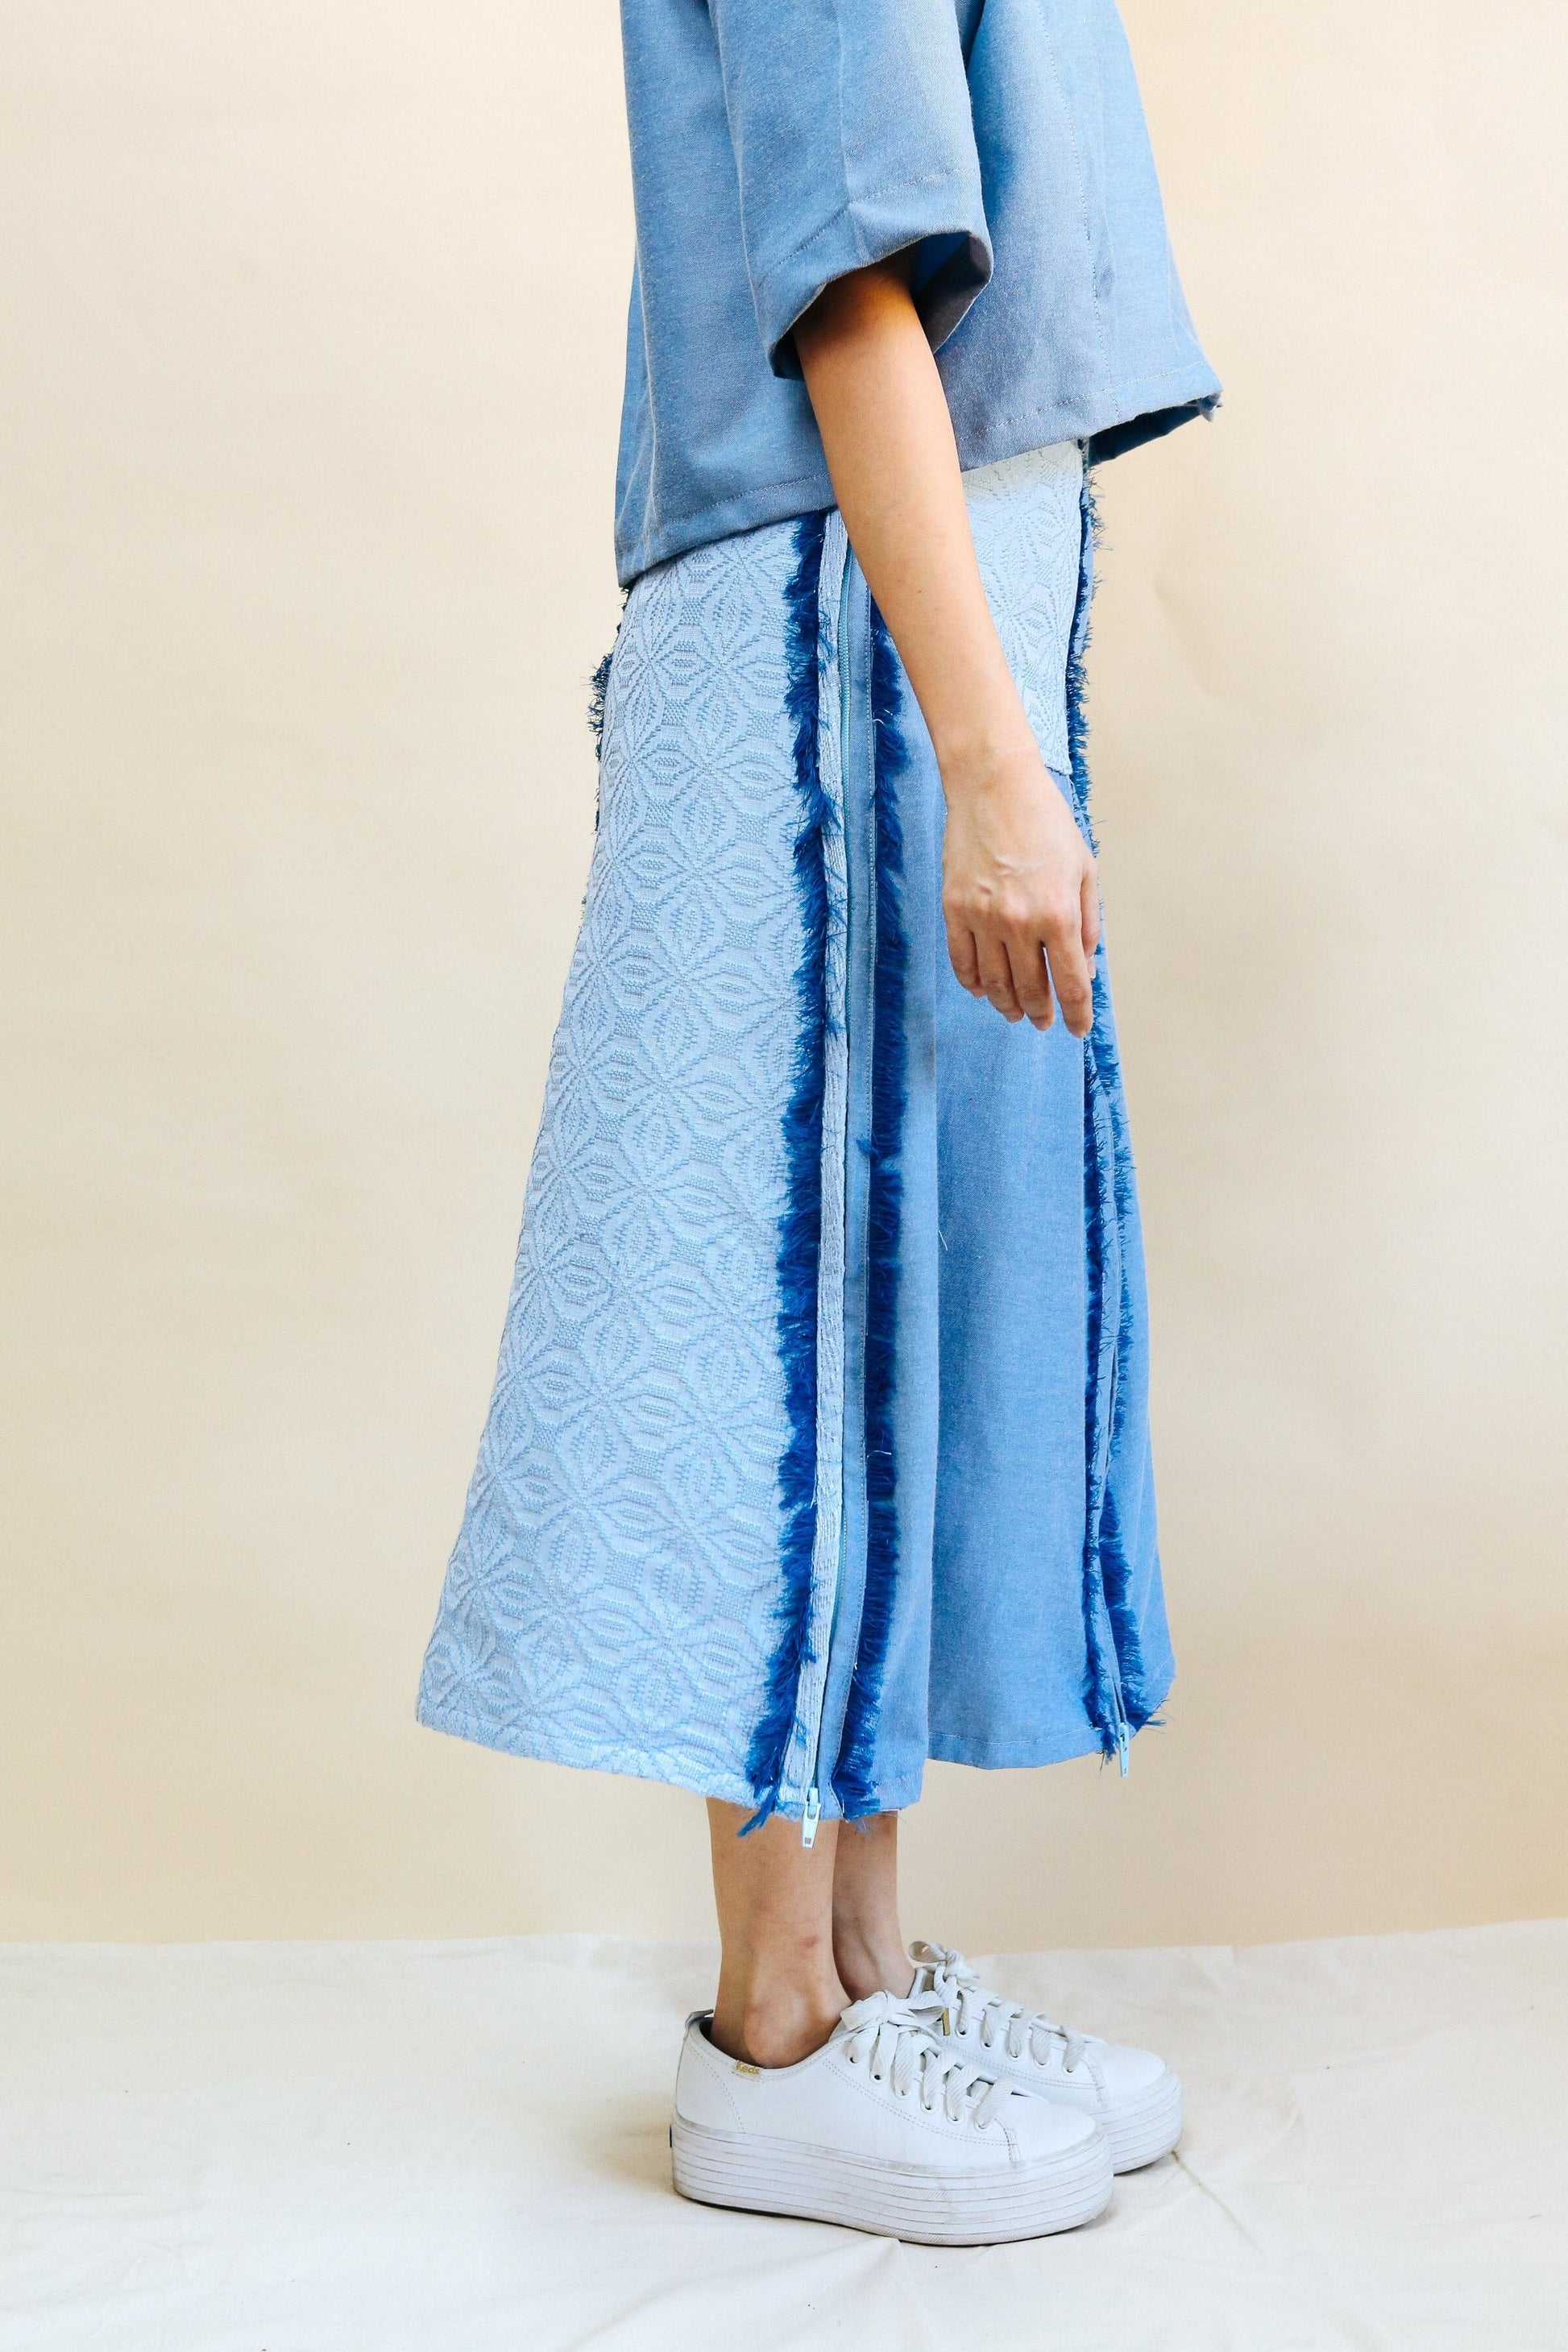 [Ready Today] 4-Way A-Line Skirt Chambray & Binetwagan Fashion Rags2Riches